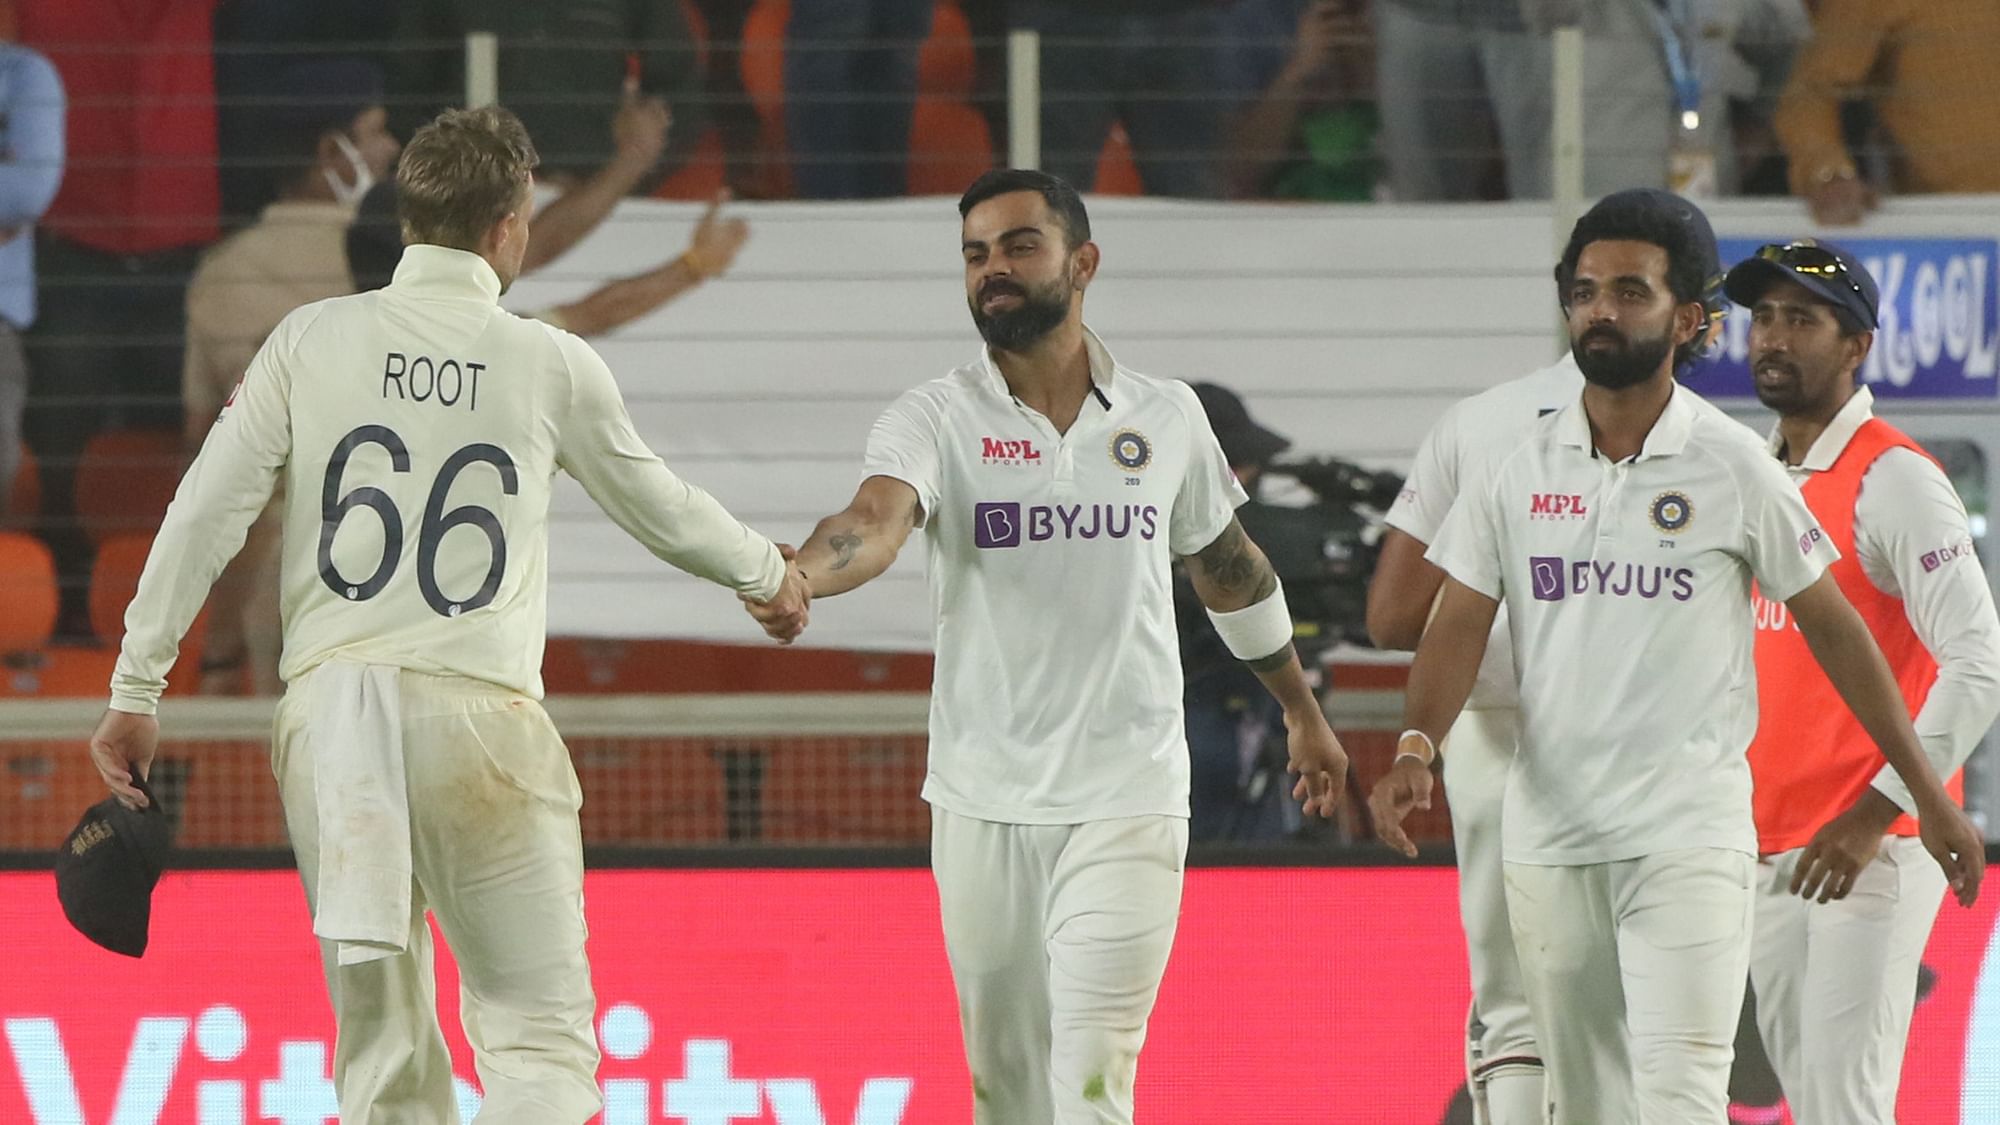 India have taken a 2-1 lead in the four match Test series.